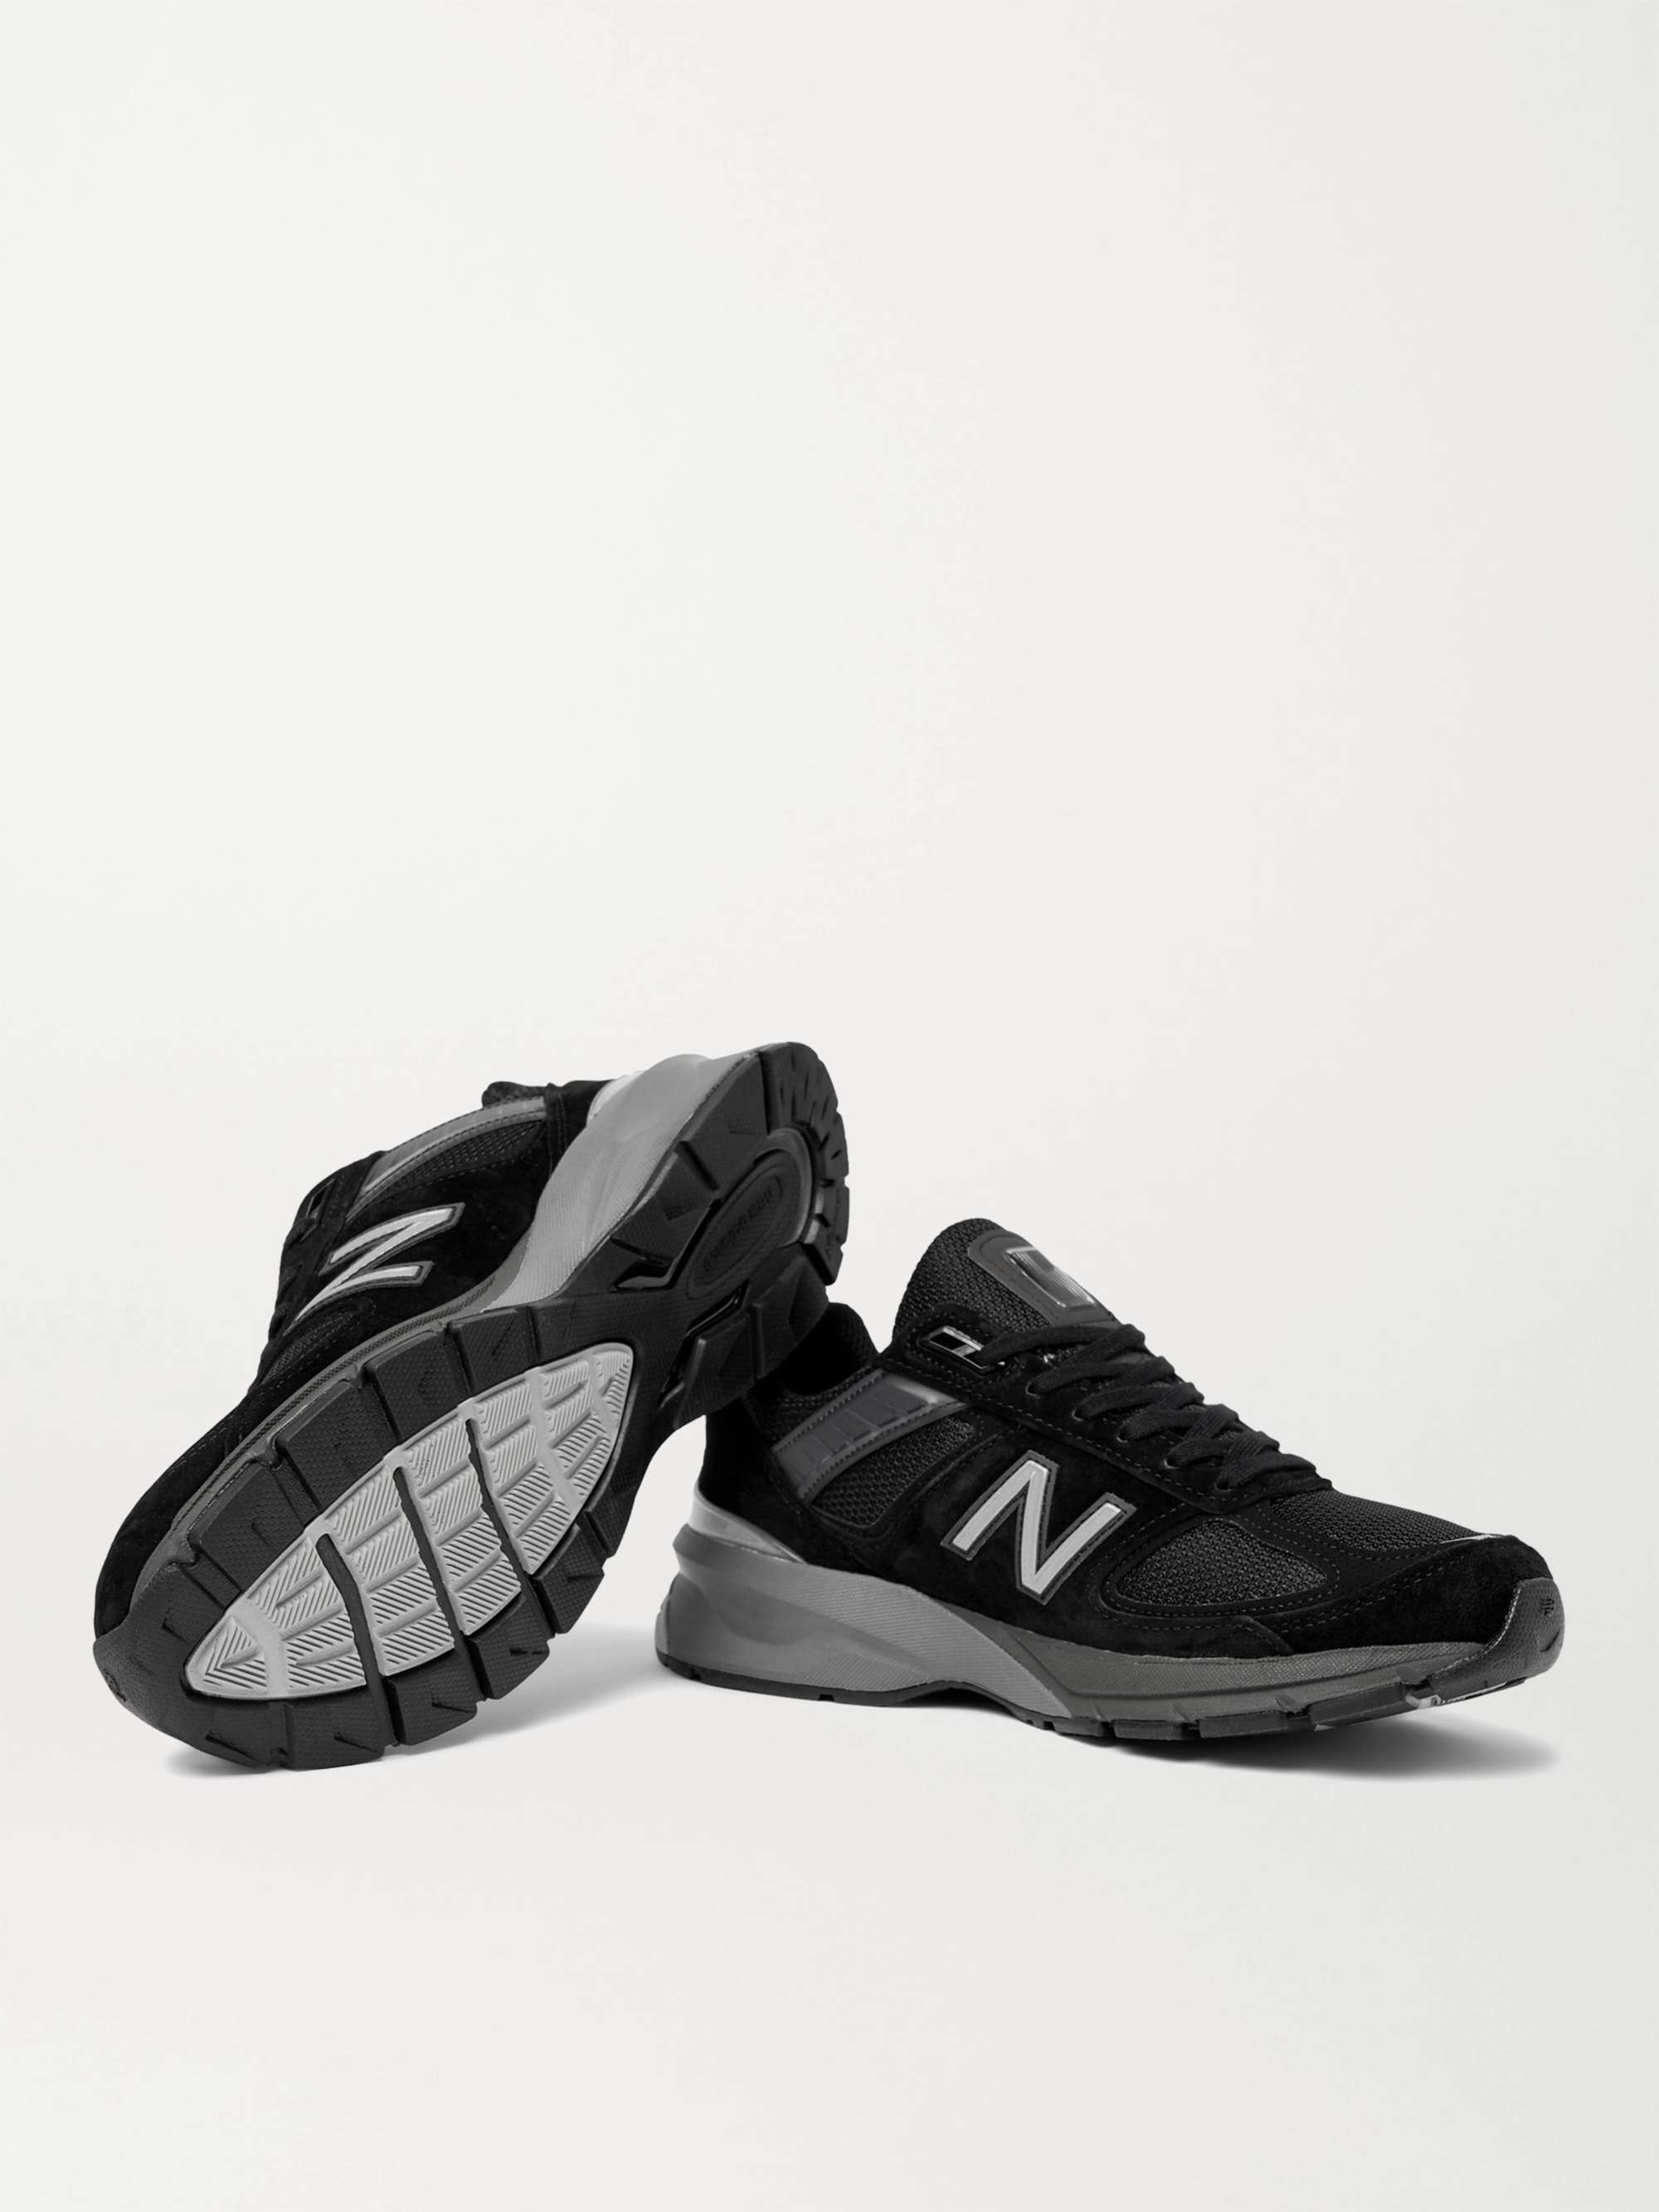 NEW BALANCE M990v5 Suede and Mesh Sneakers